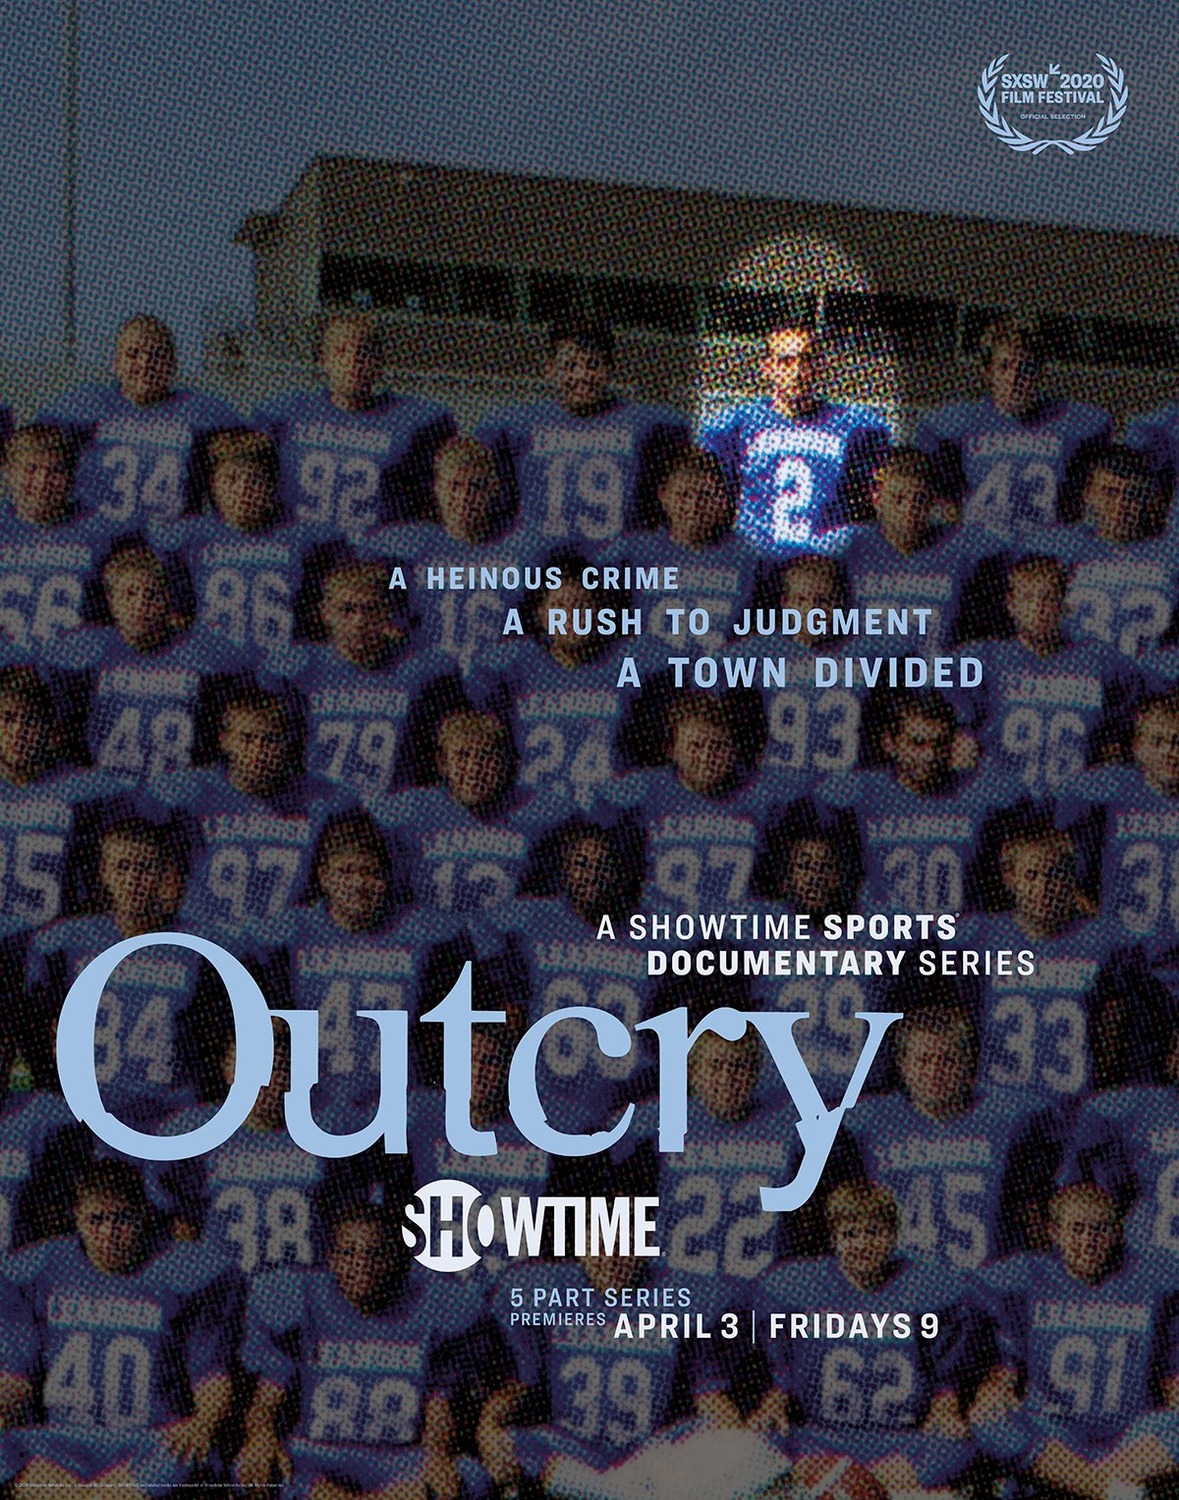 Extra Large TV Poster Image for Outcry 